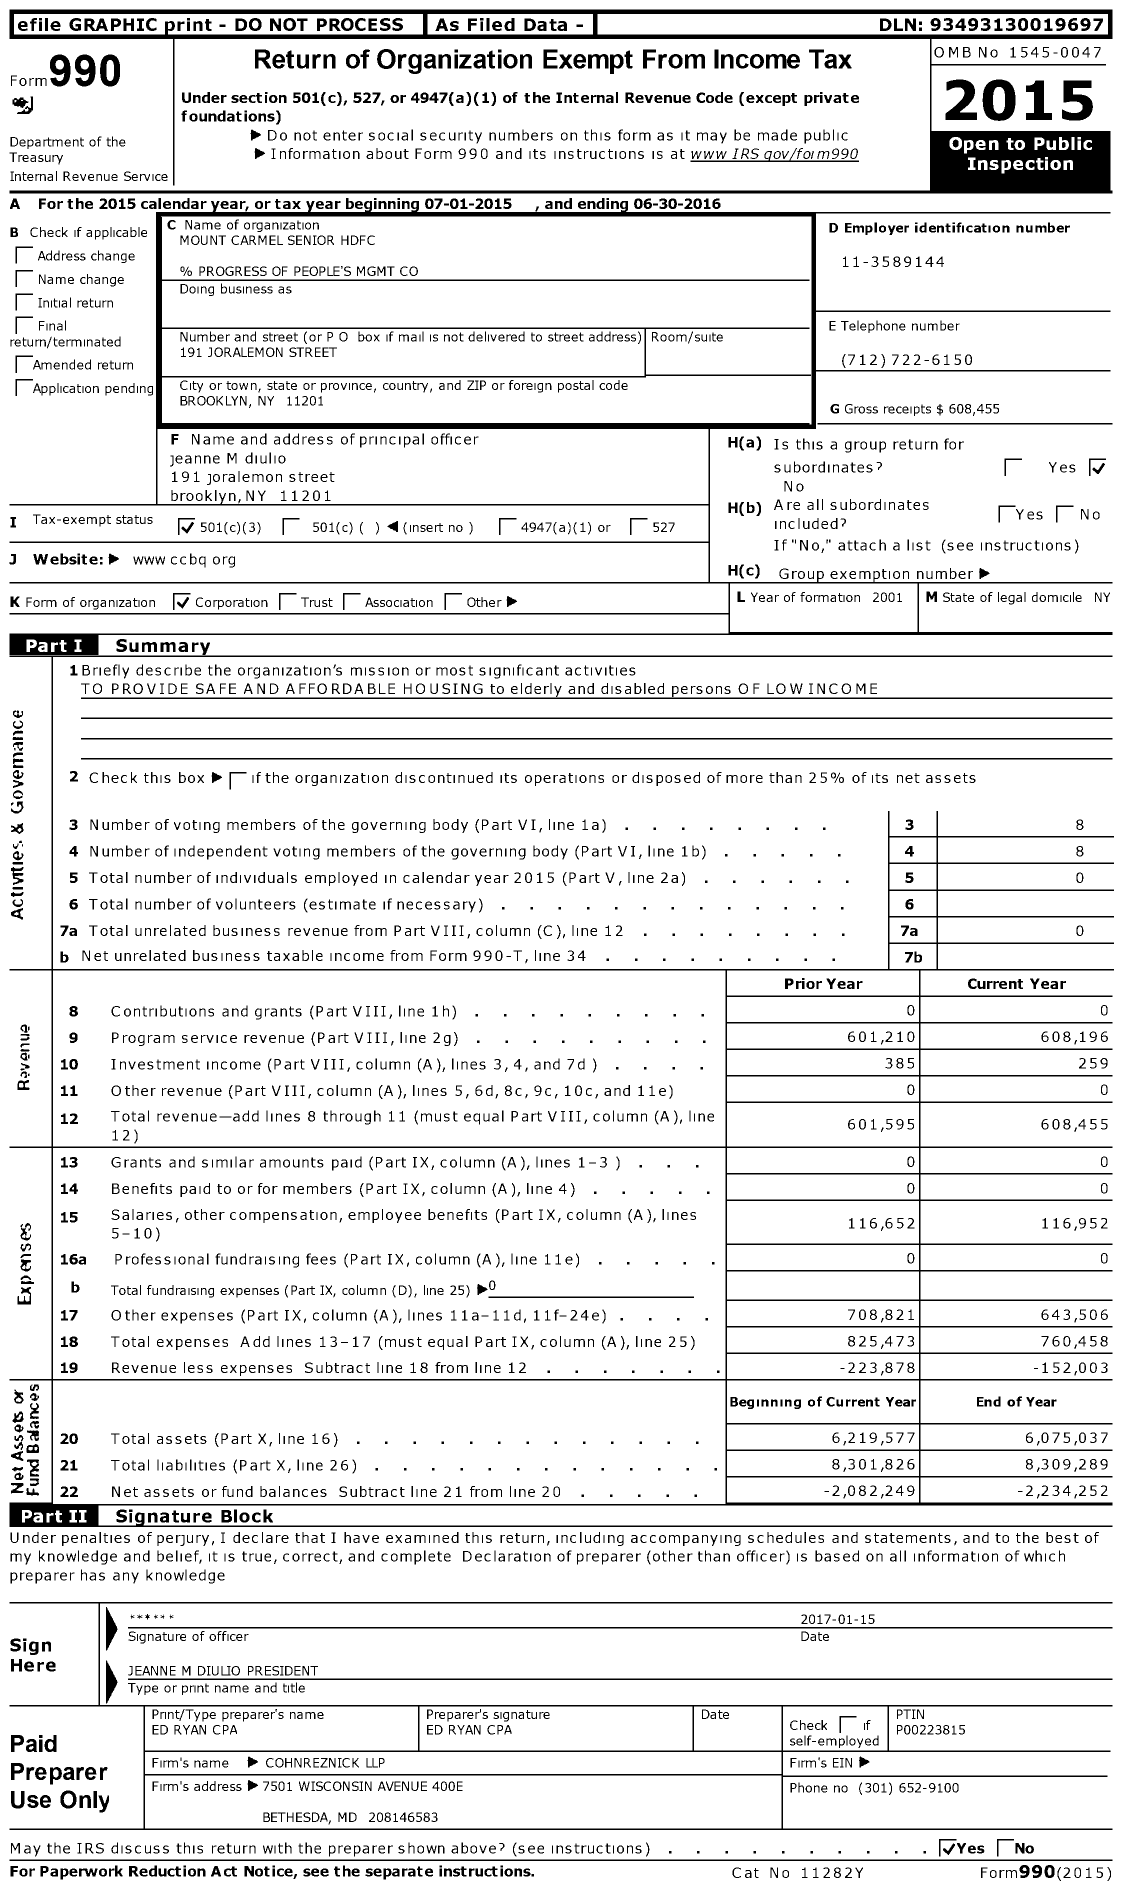 Image of first page of 2015 Form 990 for Mount Carmel Senior HDFC